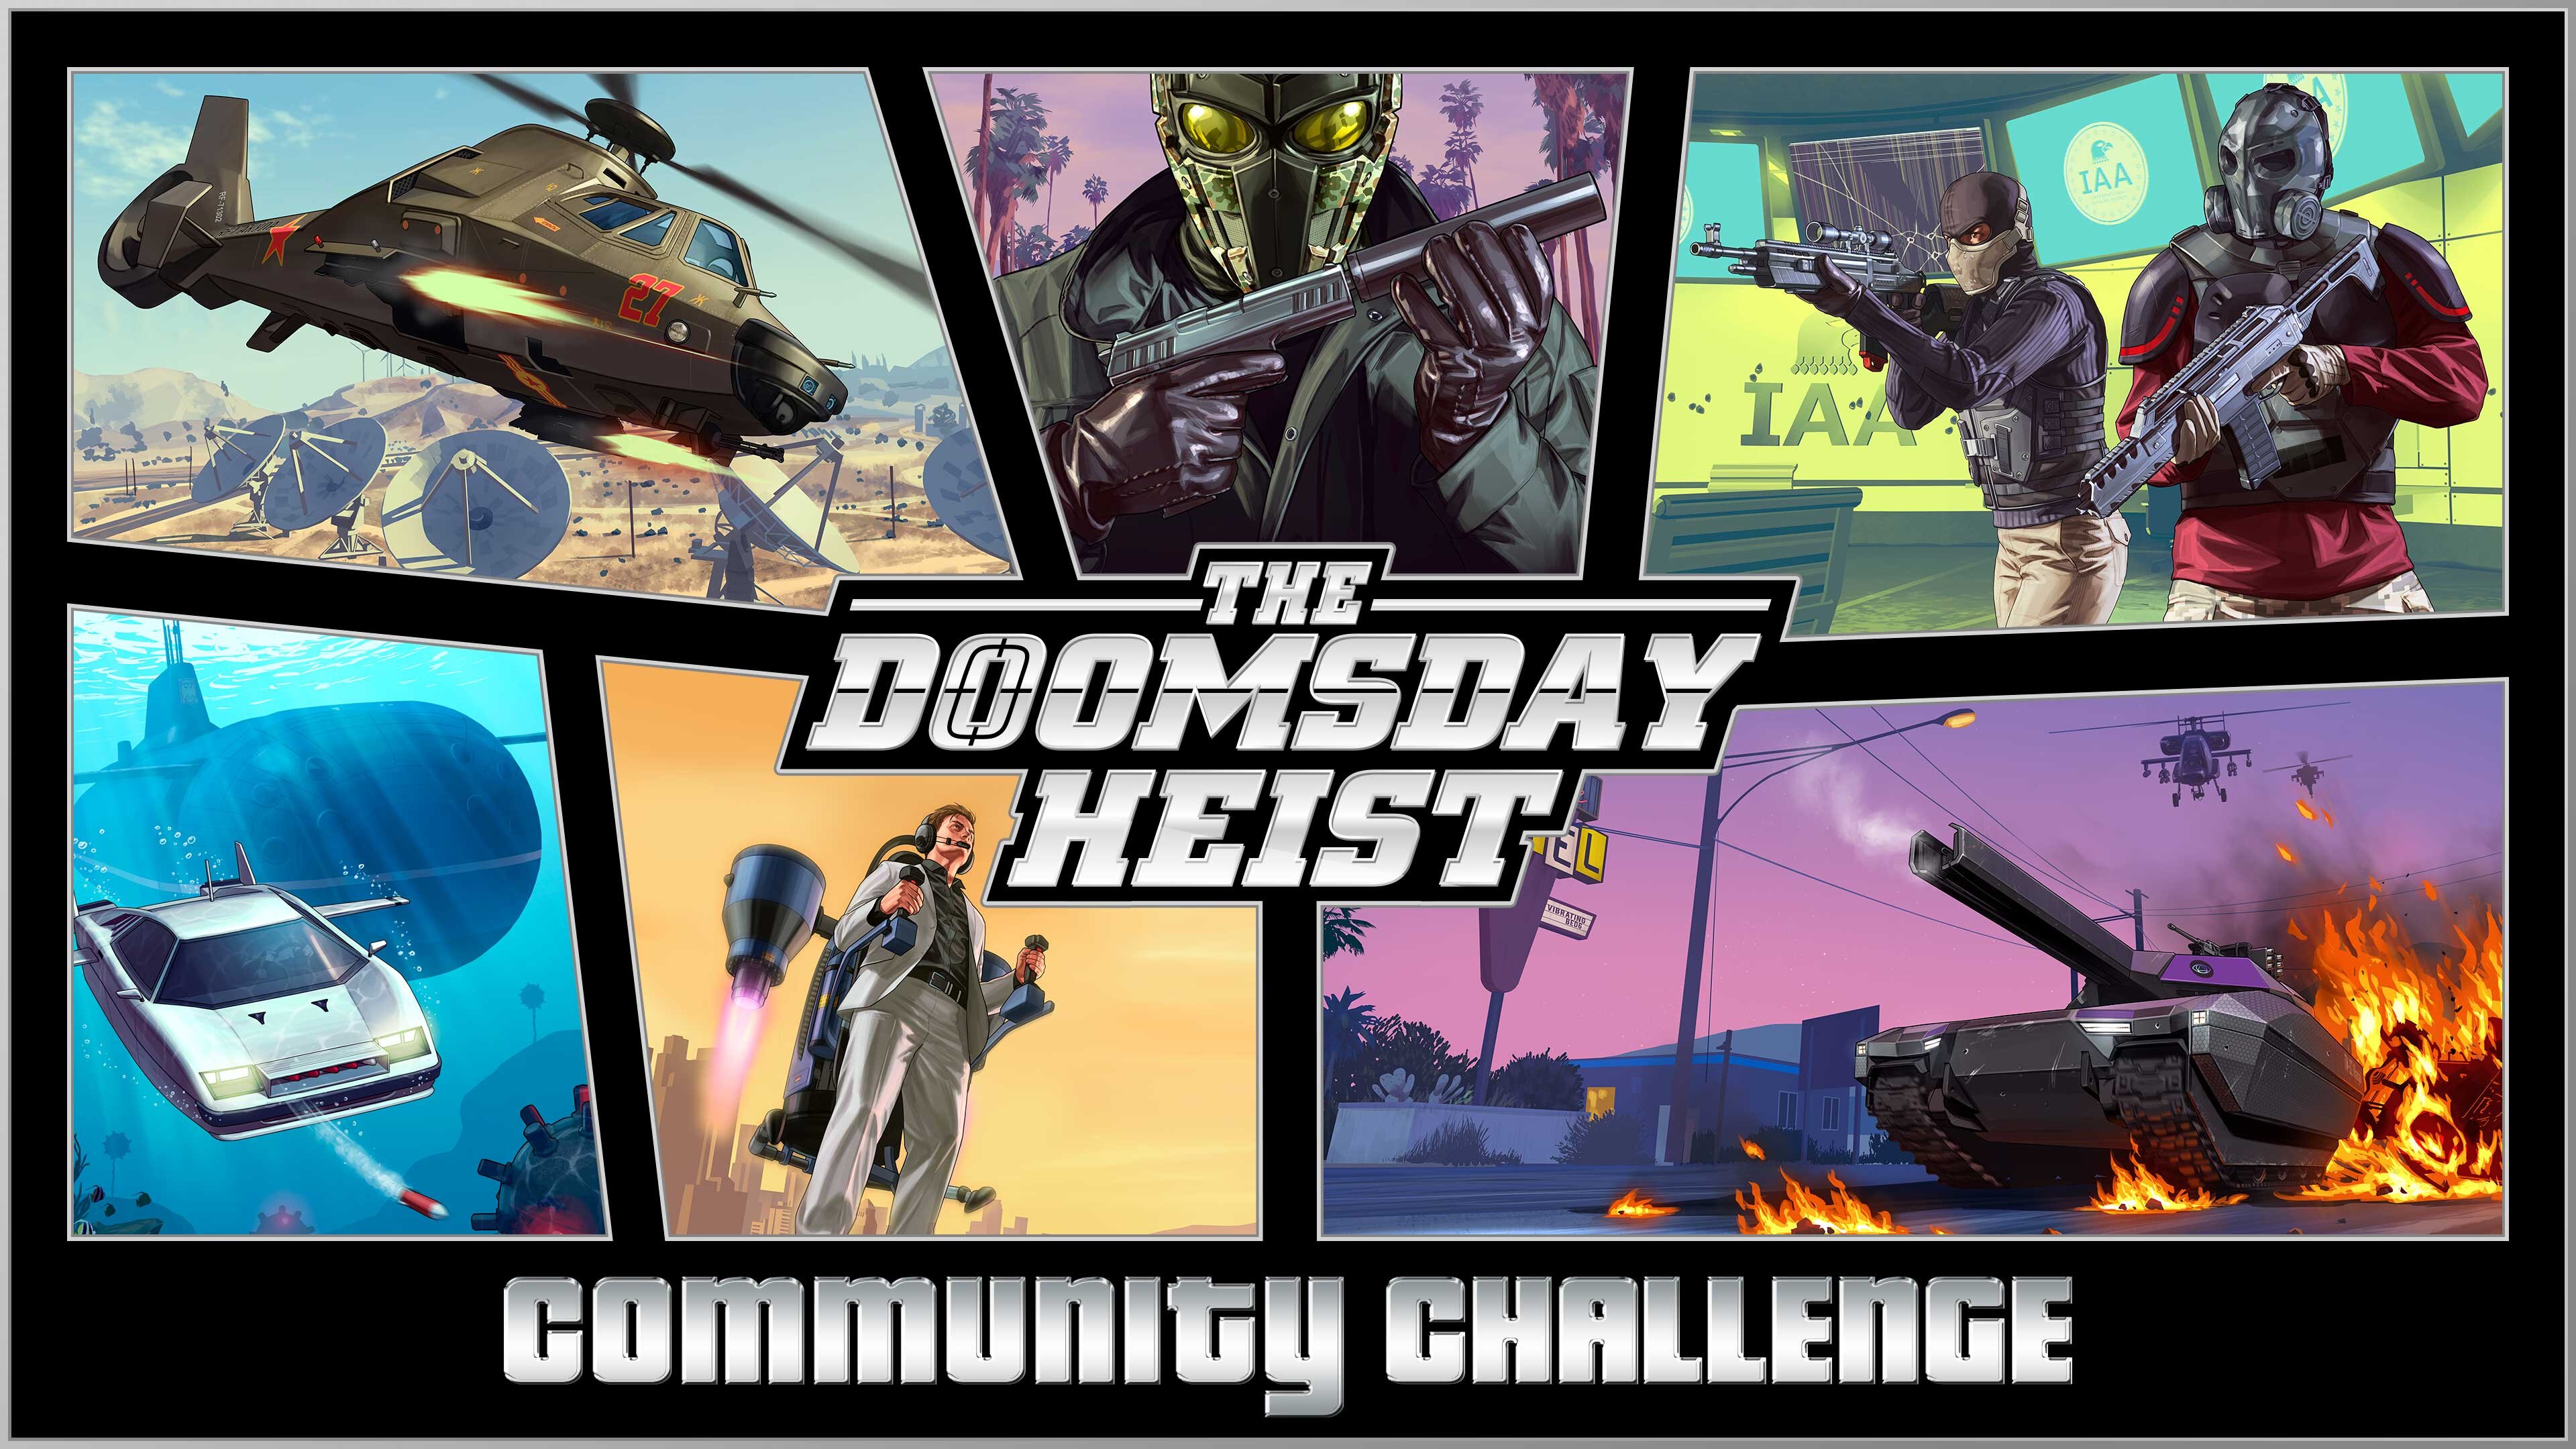 More information about "The Doomsday Community uitdaging op GTA Online"